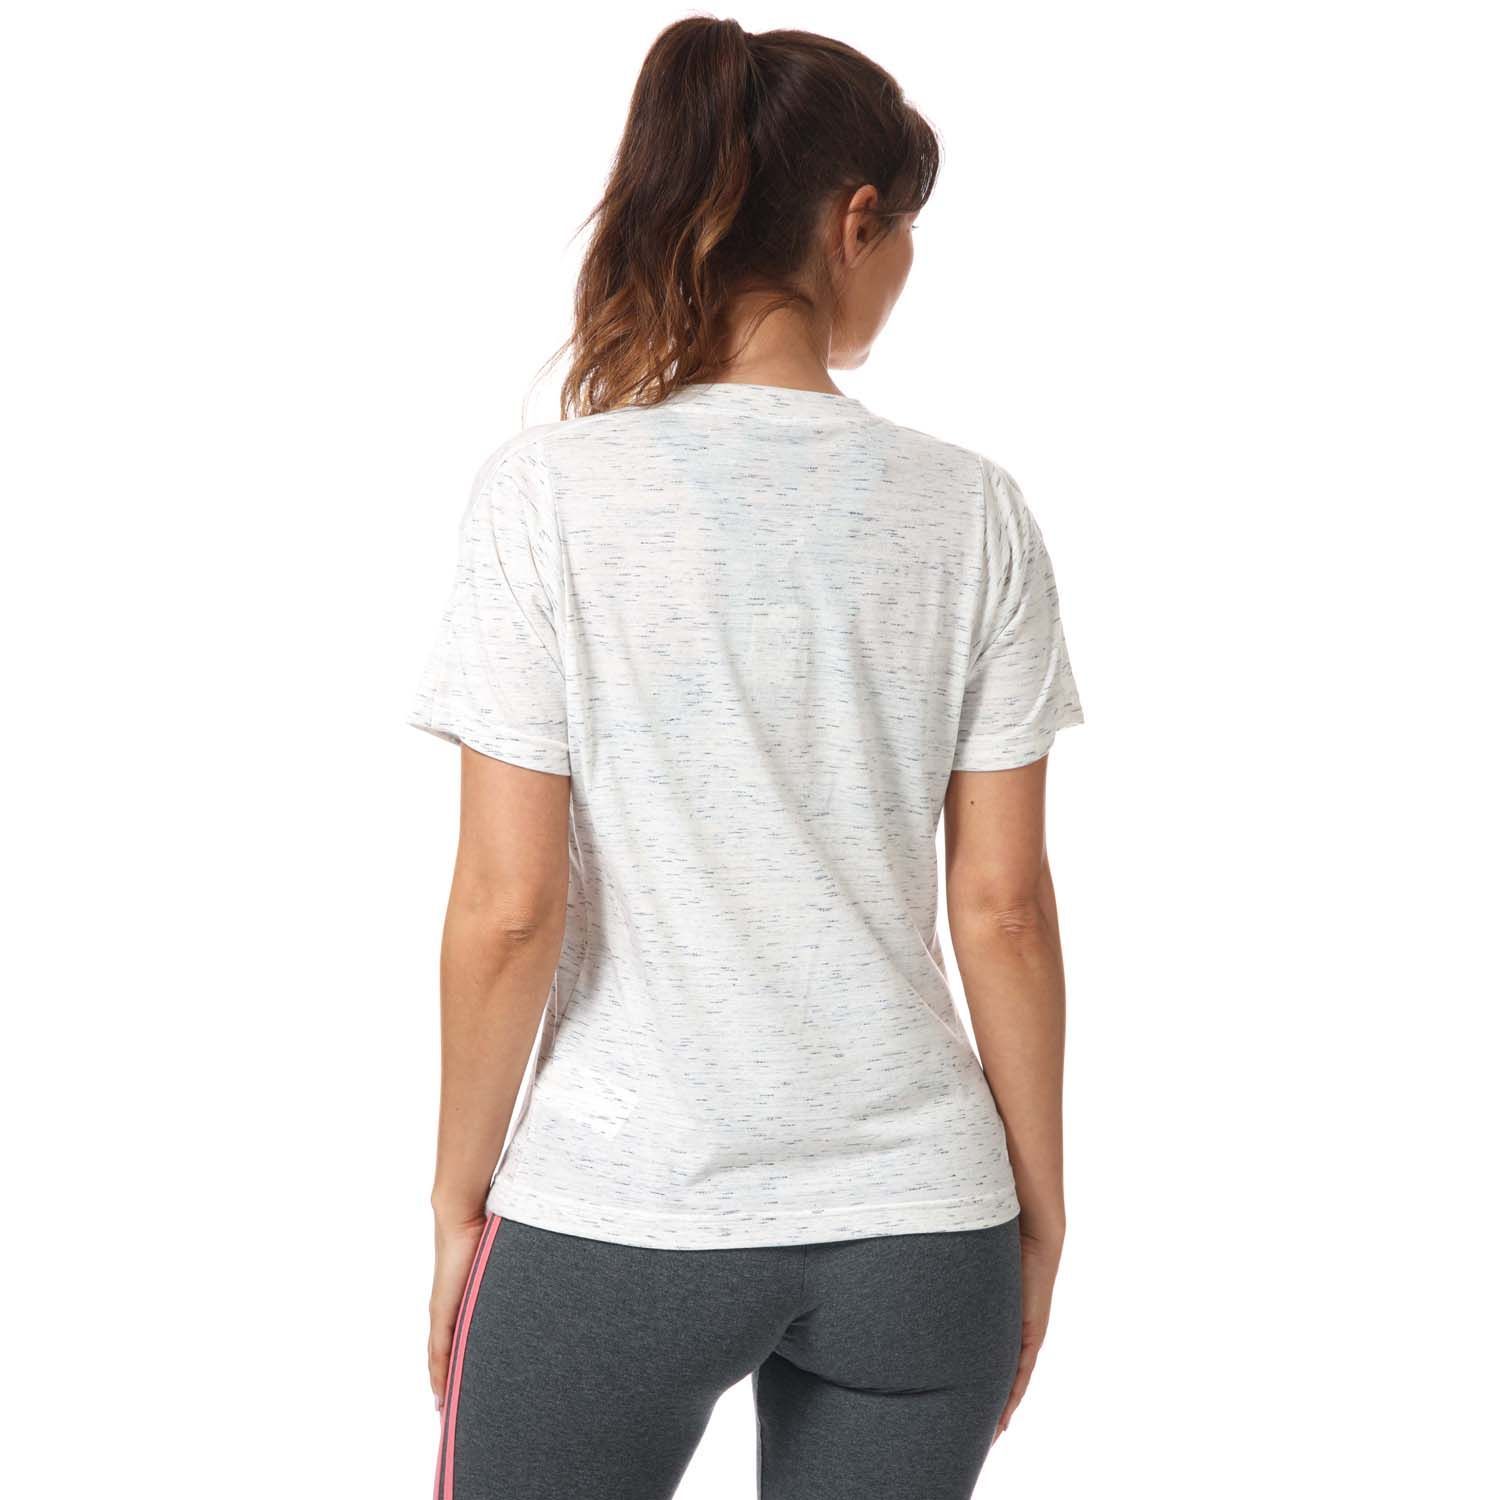 Womens adidas Sport Inspired Winners 2.0 T-Shirt in white melange.- Crew neckline.- Short sleeve.- Textured feel.- Long length.- Loose fit.- Main Material: 50% Polyester (Recycled)  25% Cotton  25% Rayon.- Ref: GP9639